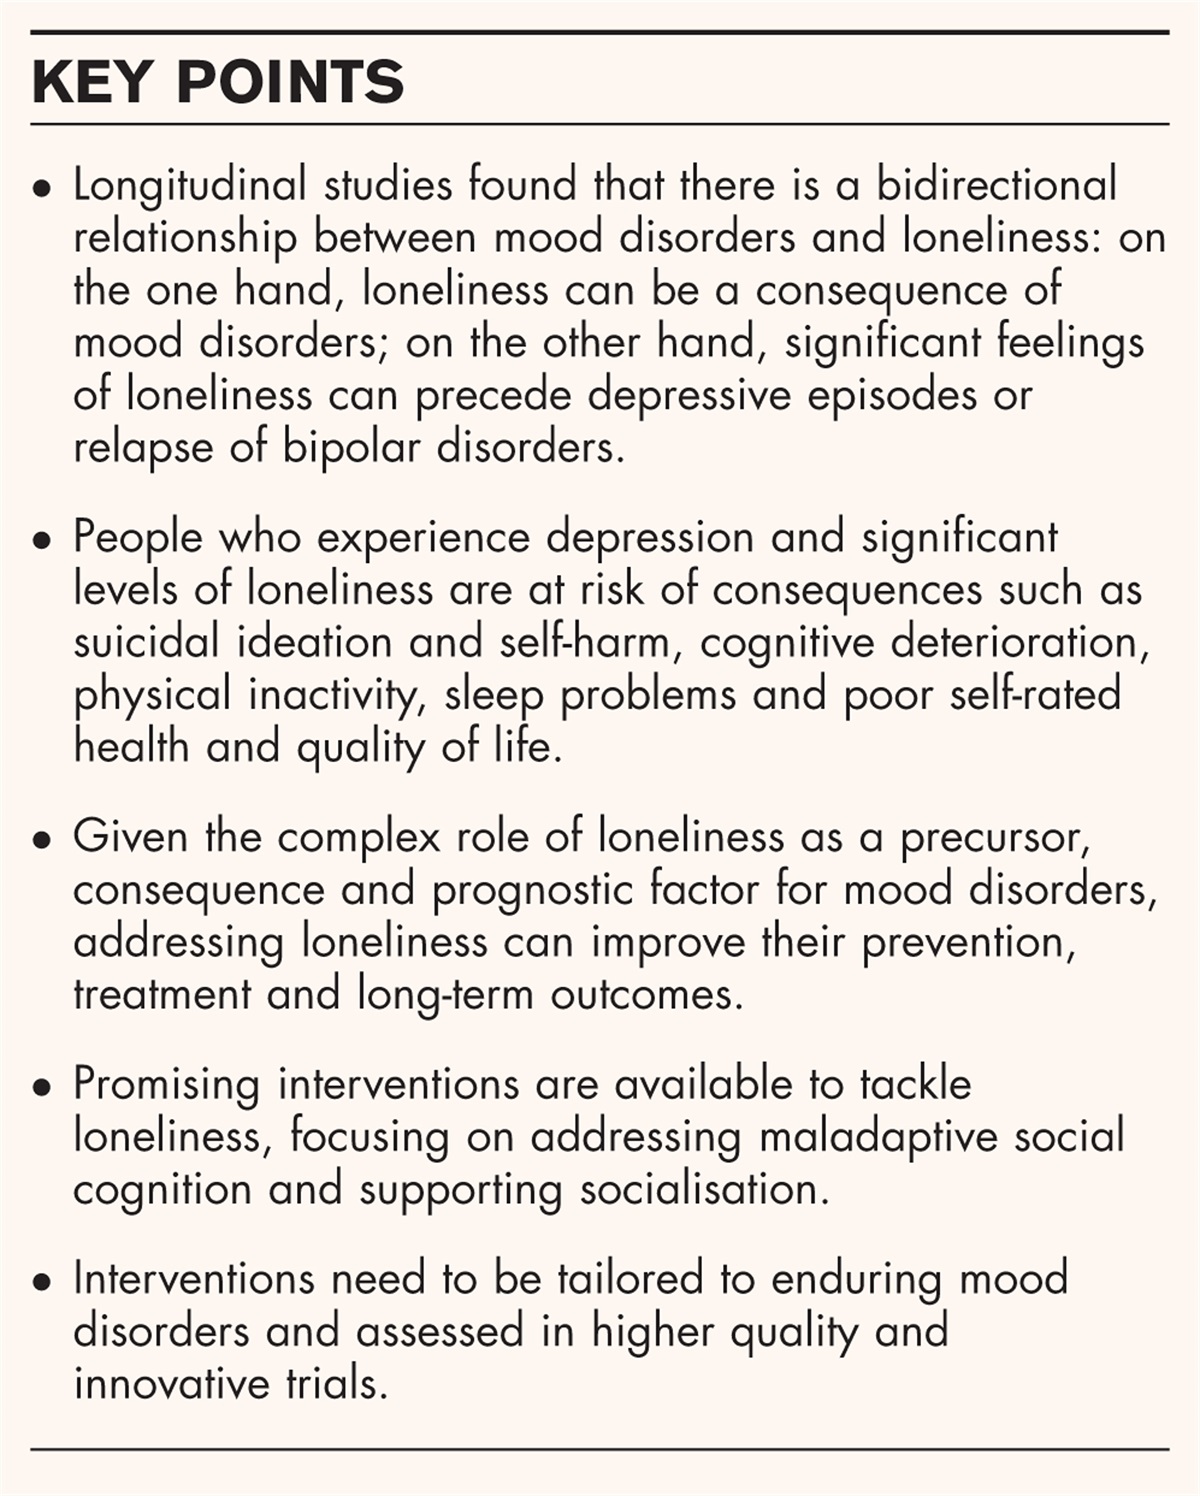 Loneliness and mood disorders: consequence, cause and/or unholy alliance?